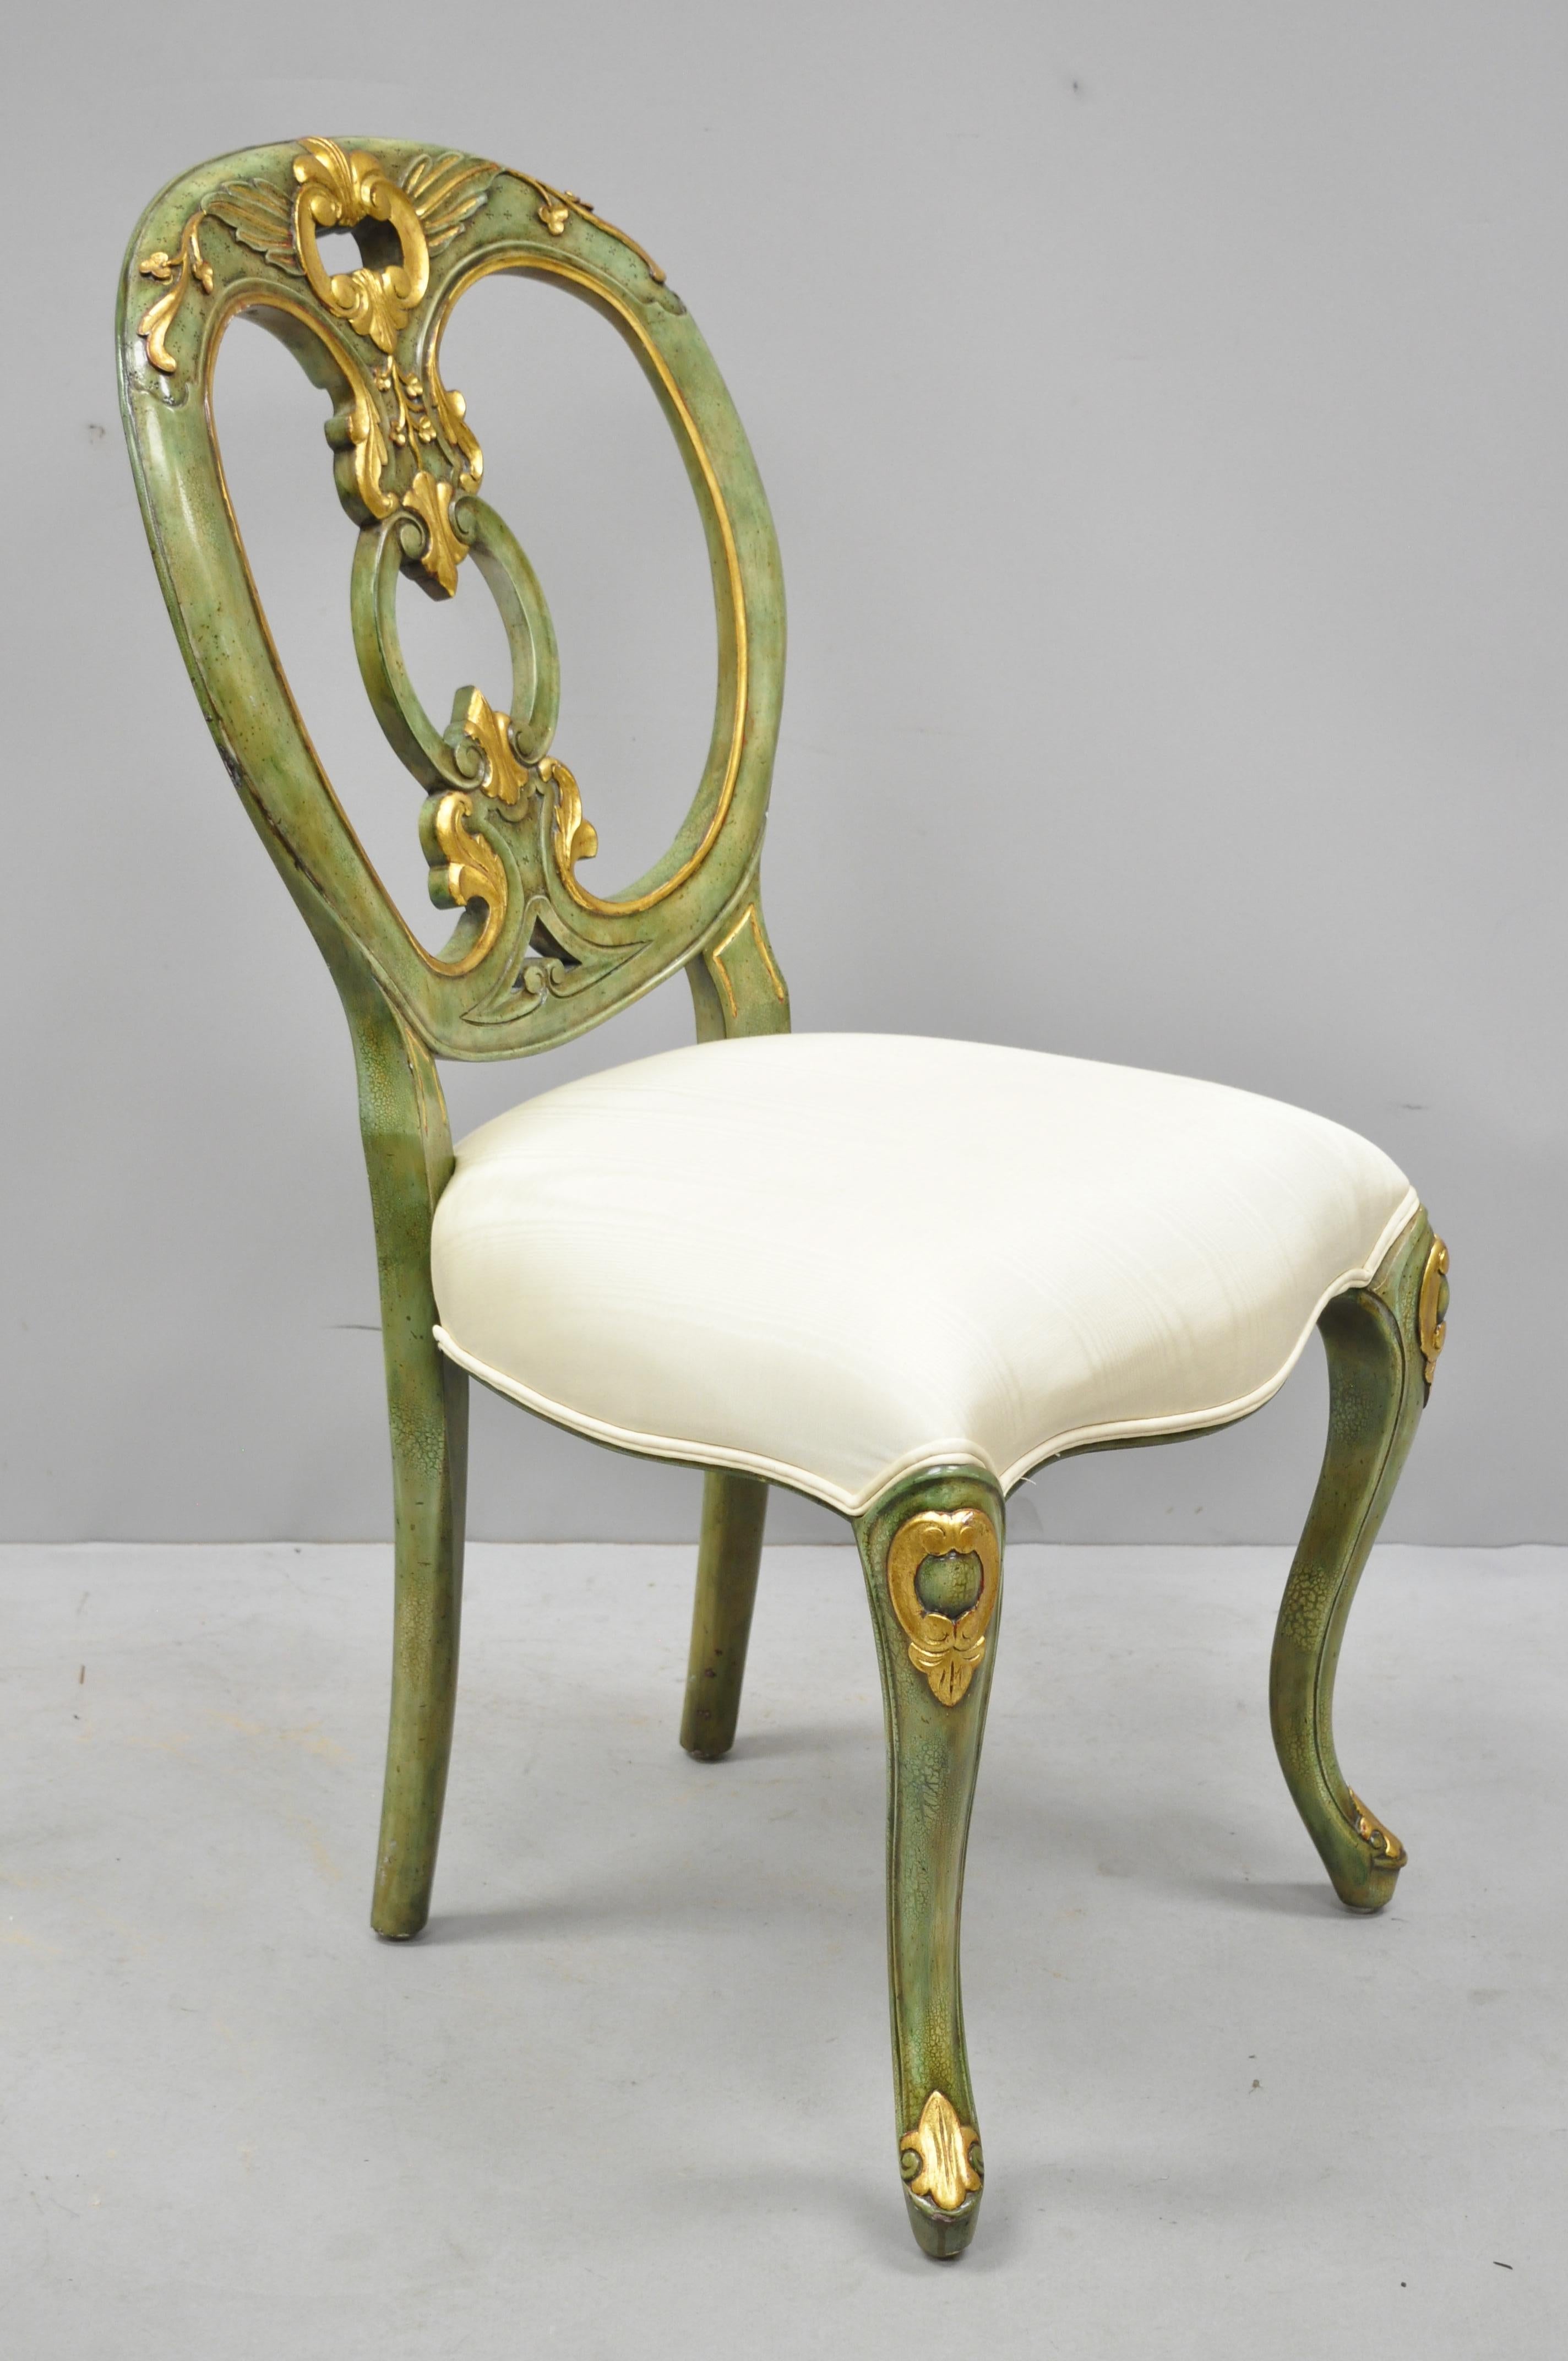 Maitland Smith green and gold painted French Rococo Victorian style accent chair. Item features solid wood construction, nicely carved details, cabriole legs, circa 20th-21st century. Measurements: 37